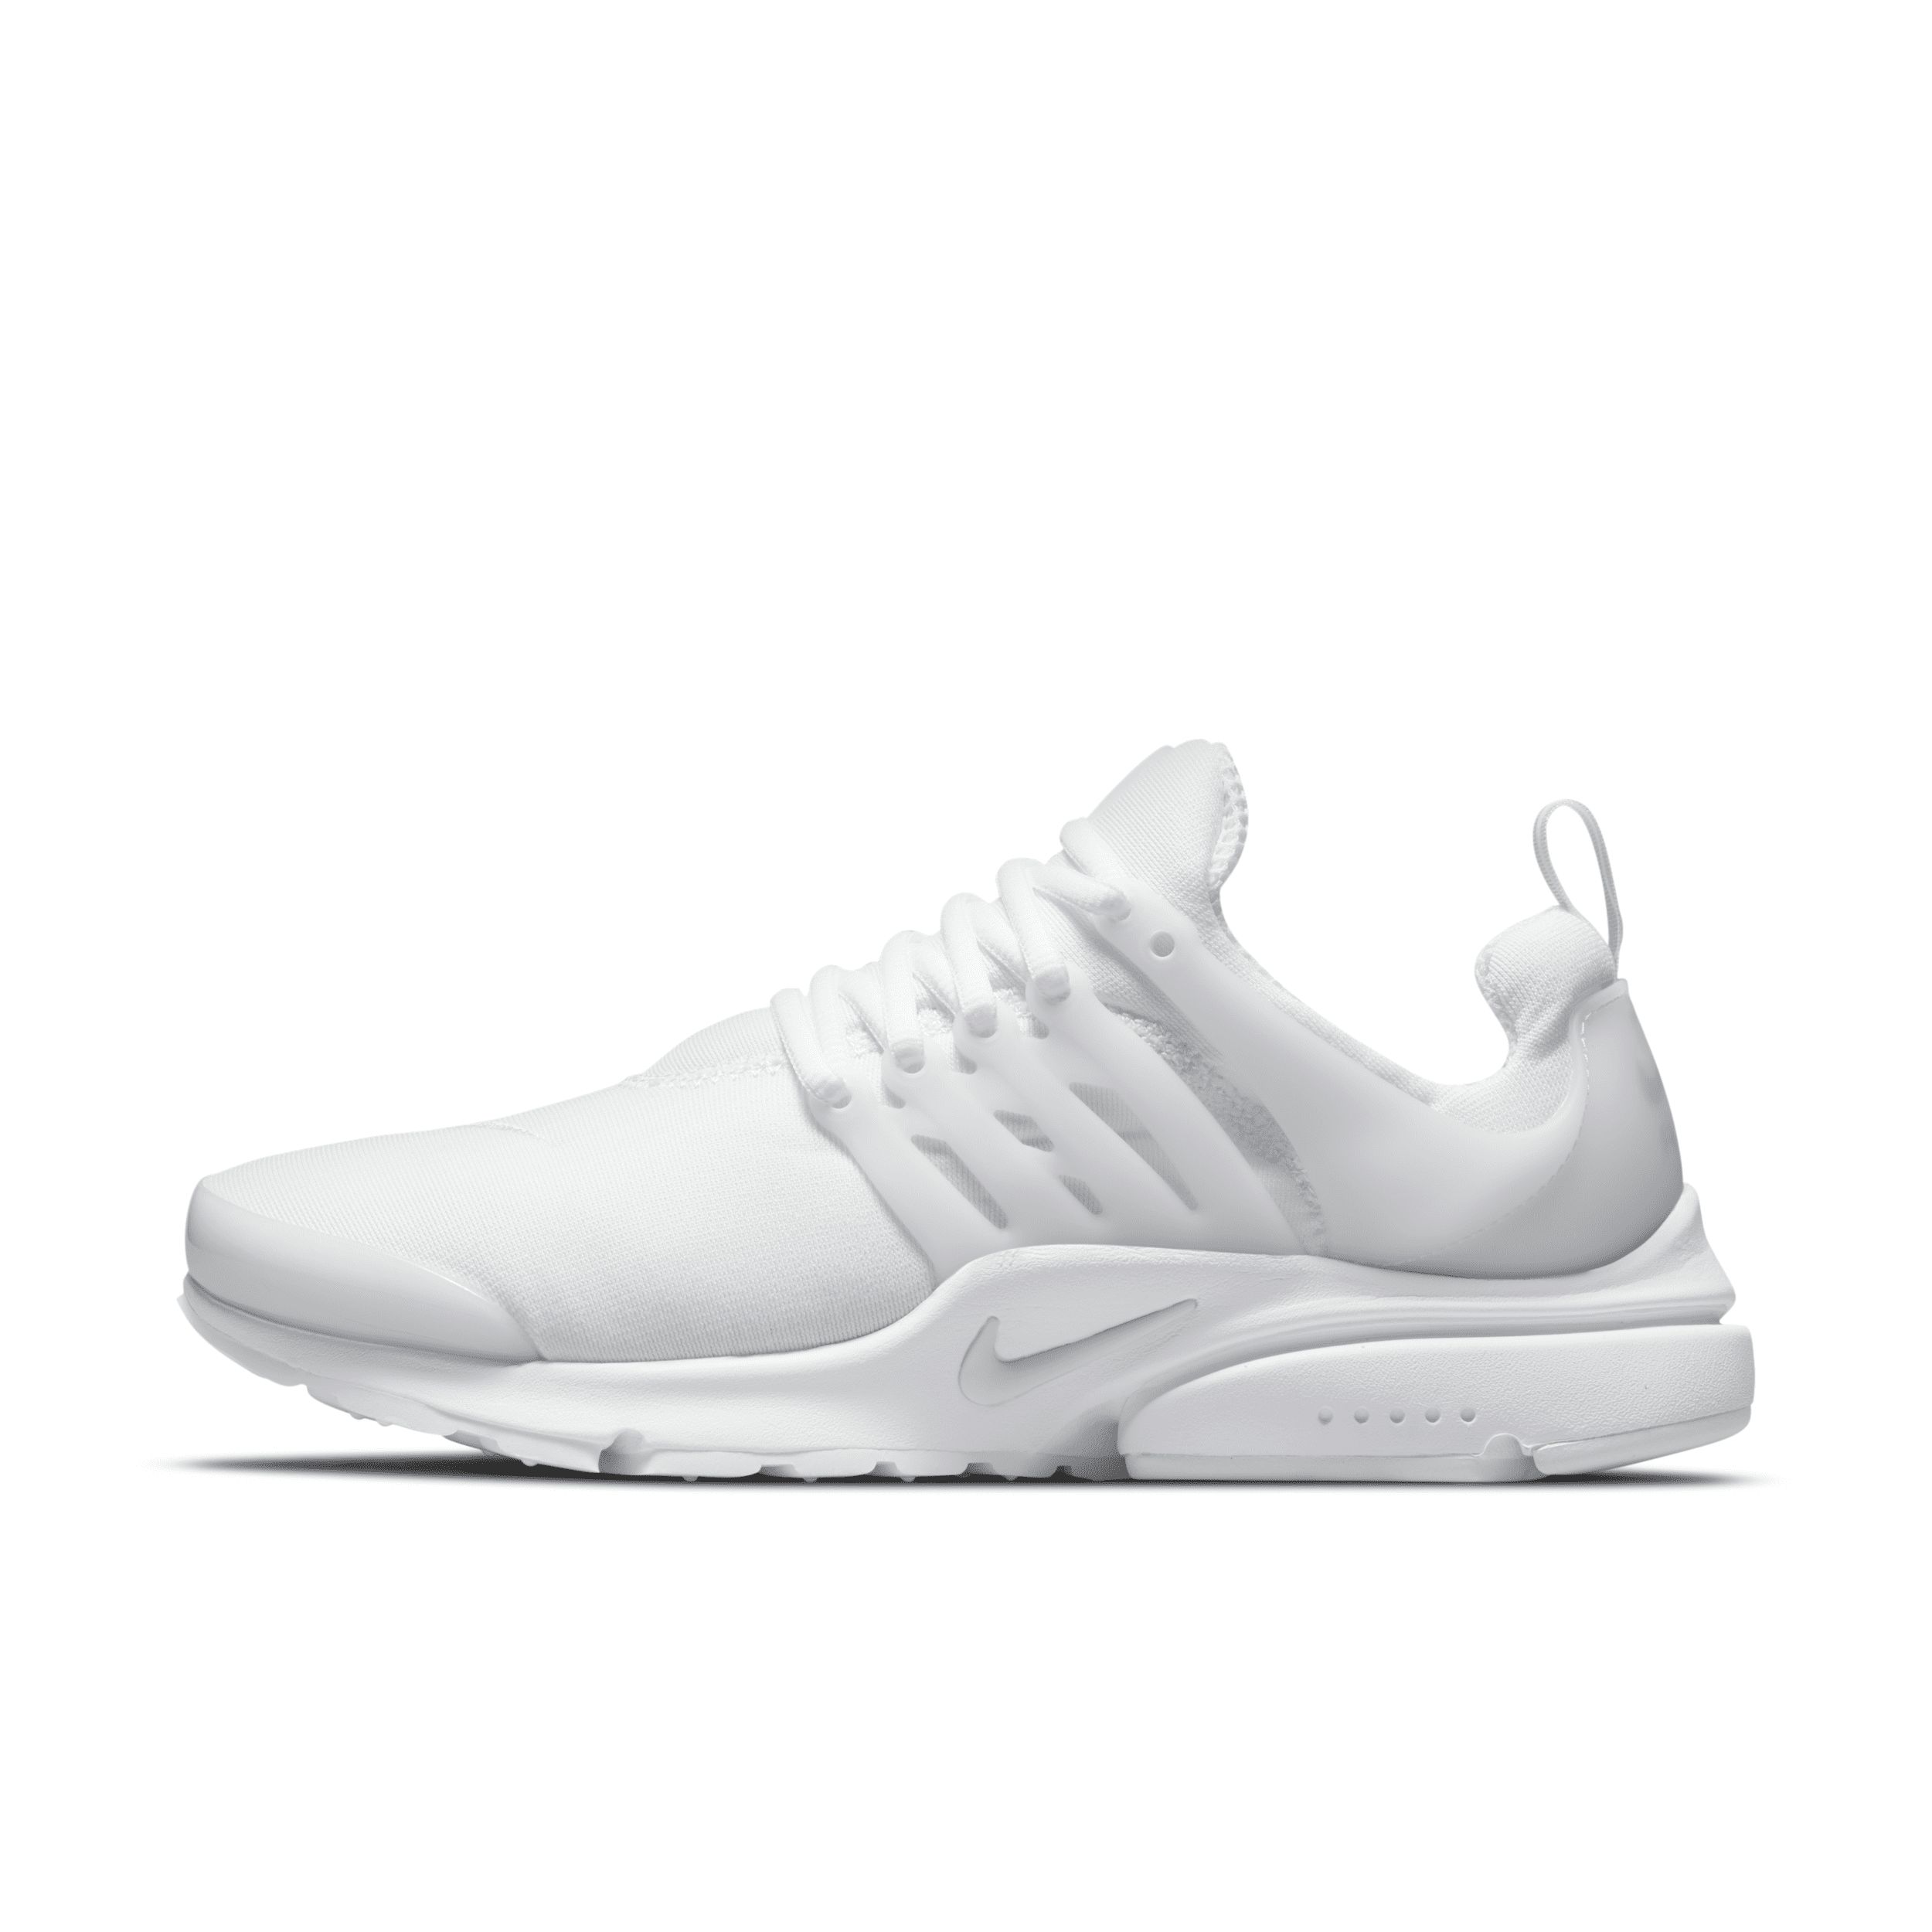 Nike Men's Air Presto Shoes in White, Size: 11 | CT3550-100 | Nike (US)